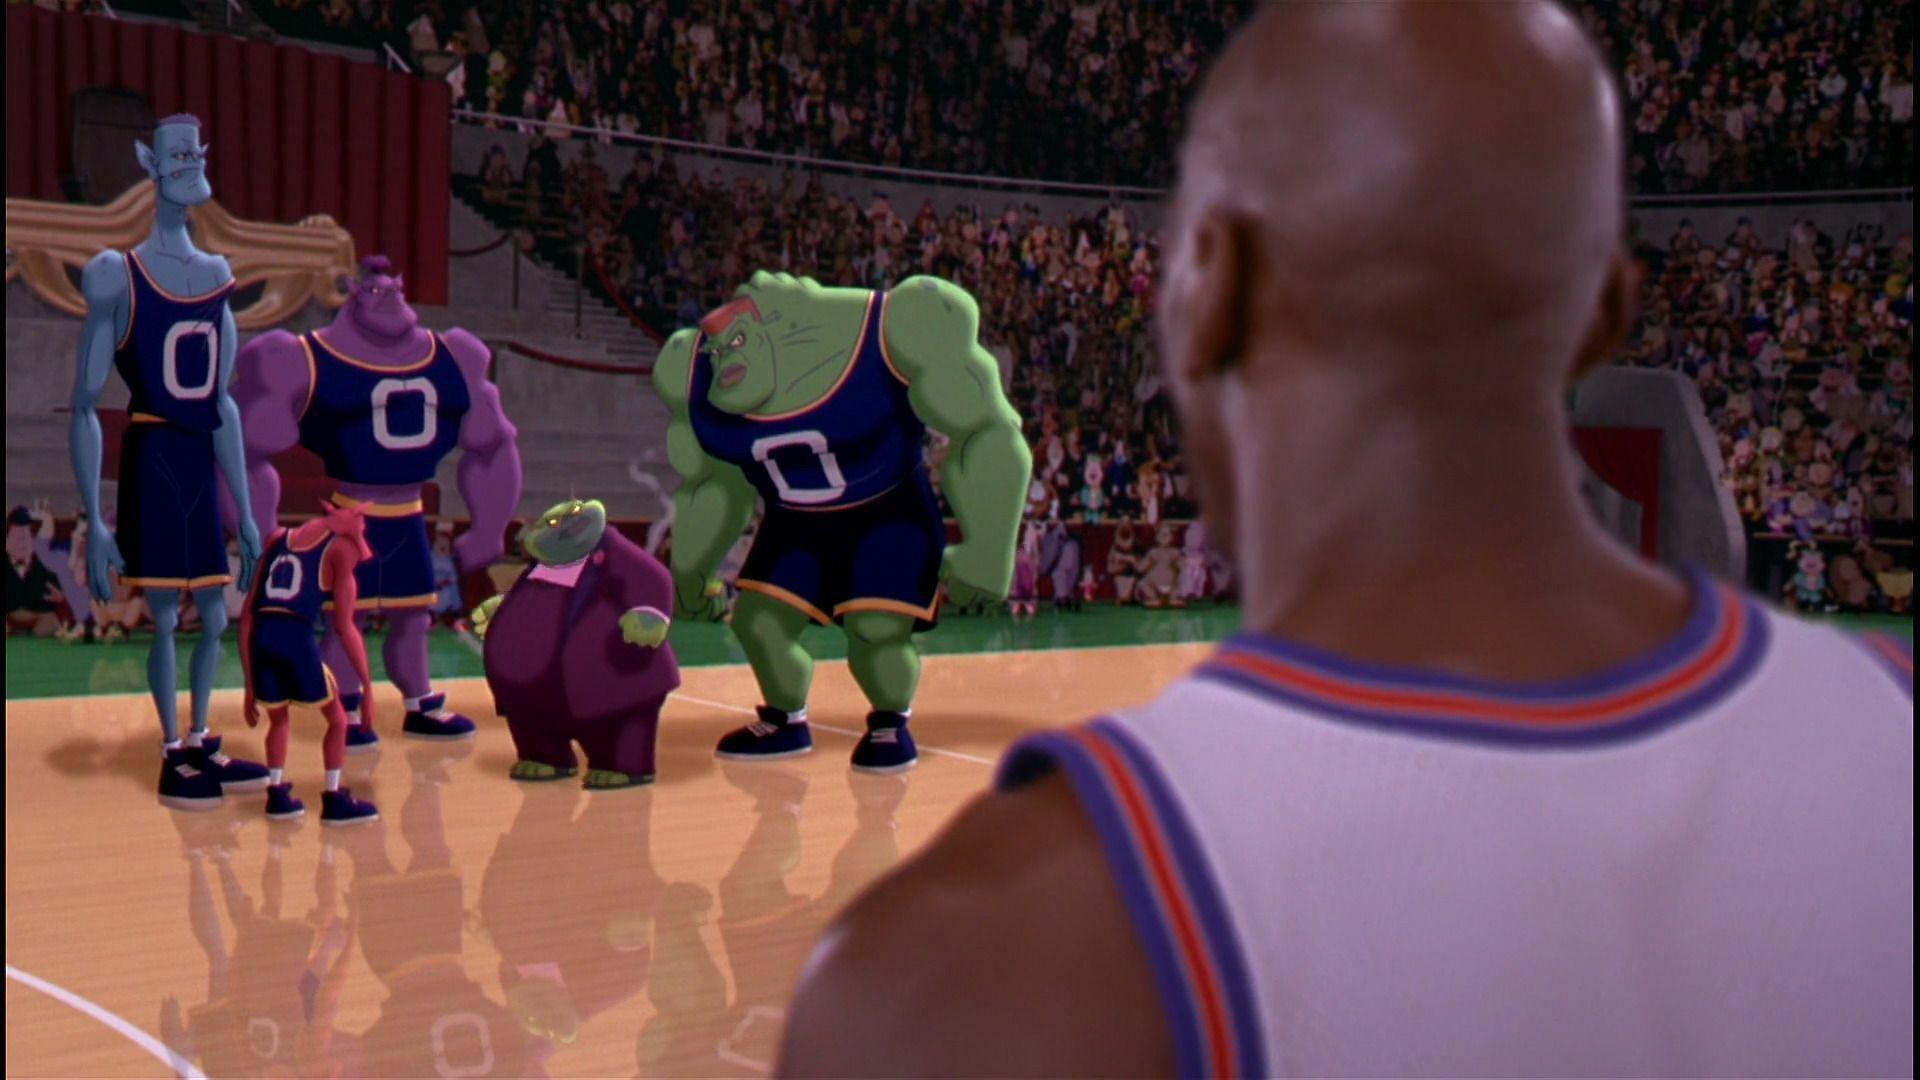 Space Jam HD Wallpaper 1920x1080PX Wallpaper Space Movies